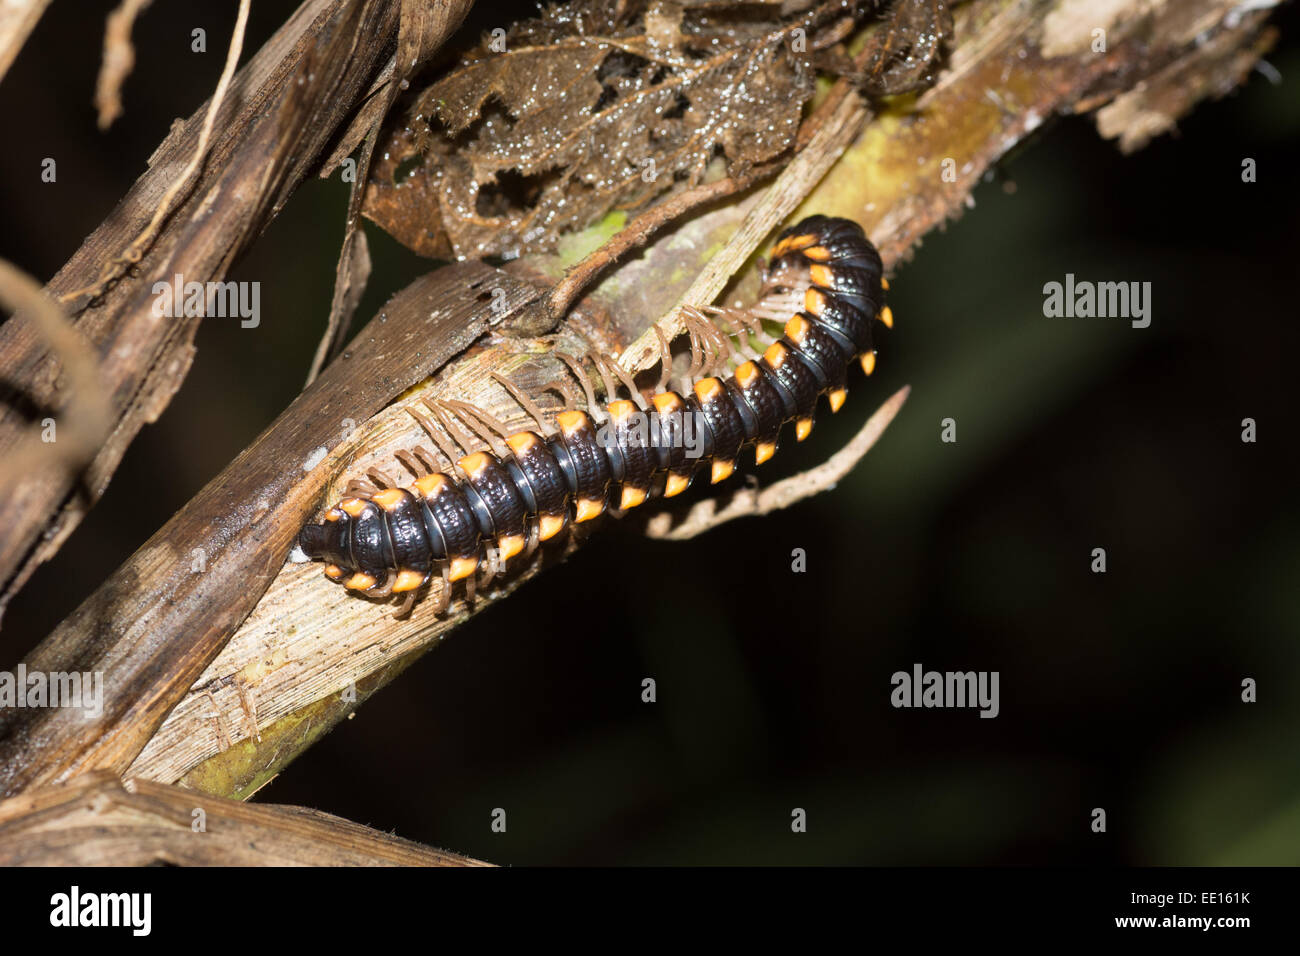 Armoured or Flat-backed Millipede on a branch in Amazonian jungle near Rio Cenepa in northern Peru Stock Photo